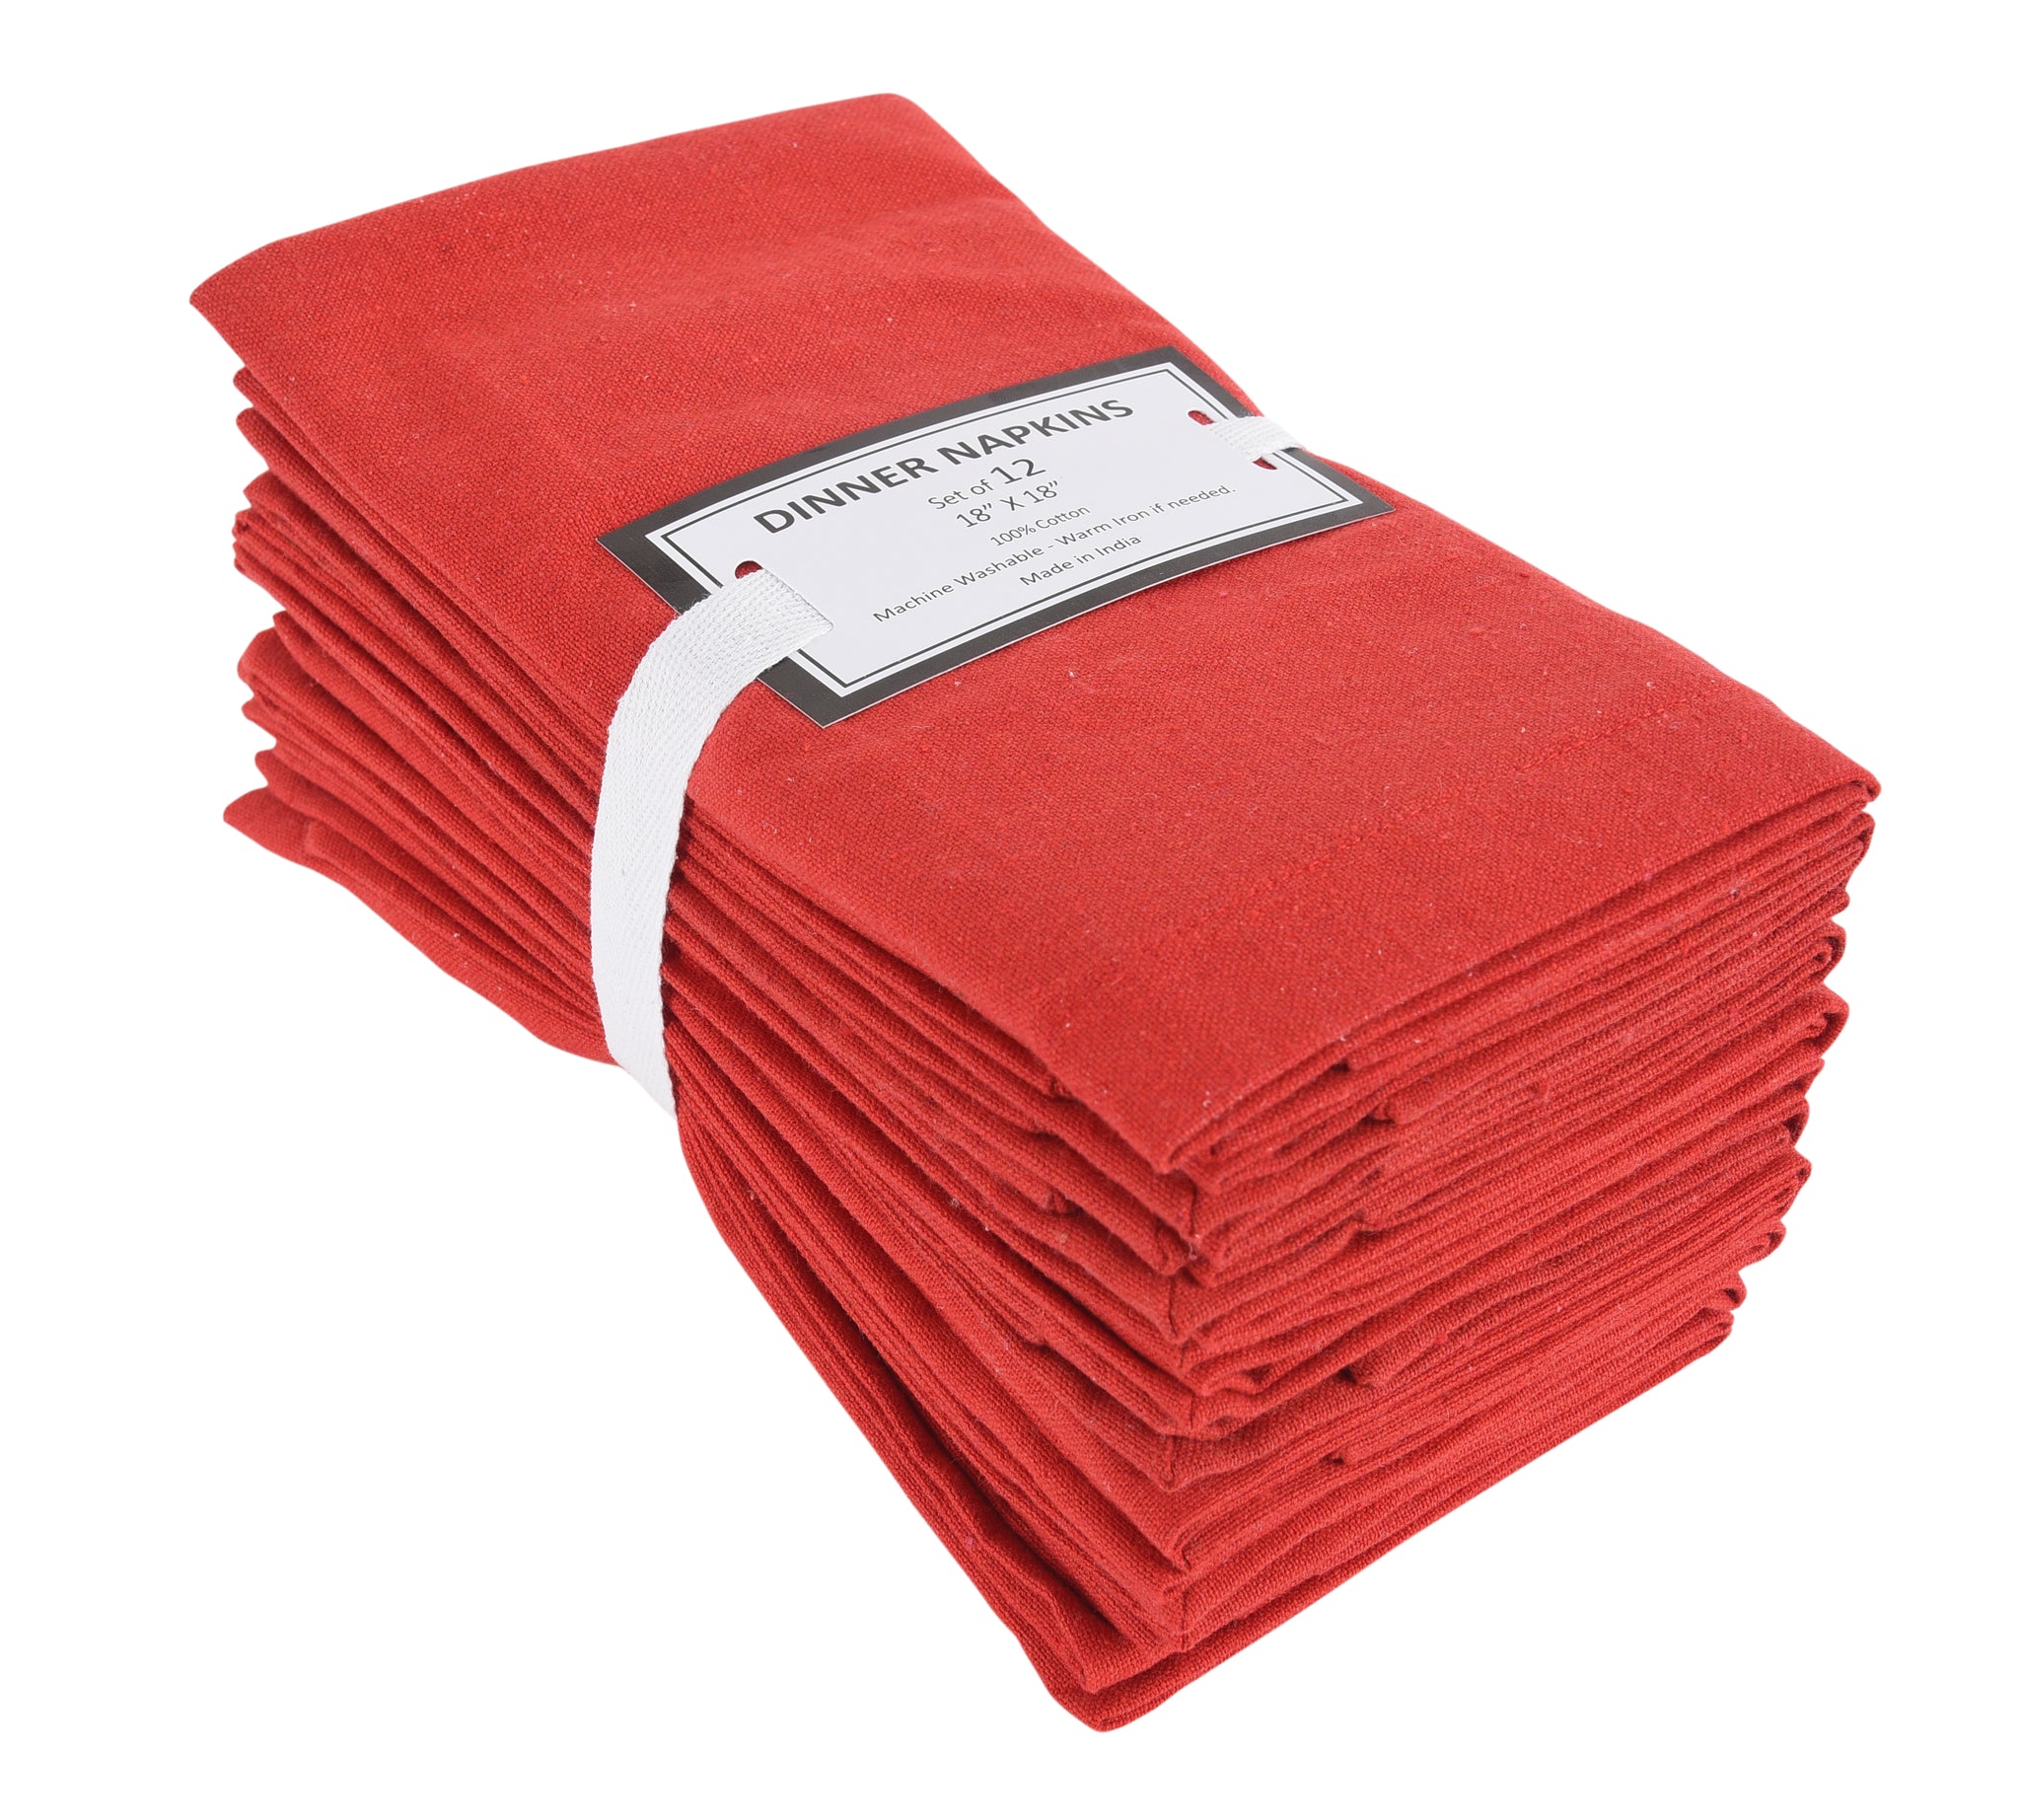 Lushomes Cloth Napkin Set of 12 with Mitted Corners, Cotton Table Dinner Linen, Eco-Friendly Cotton Fabric, Machine Washable for Dinner, Restaurant & Banquet, 18x18 Inches (45x45 Cms), Red